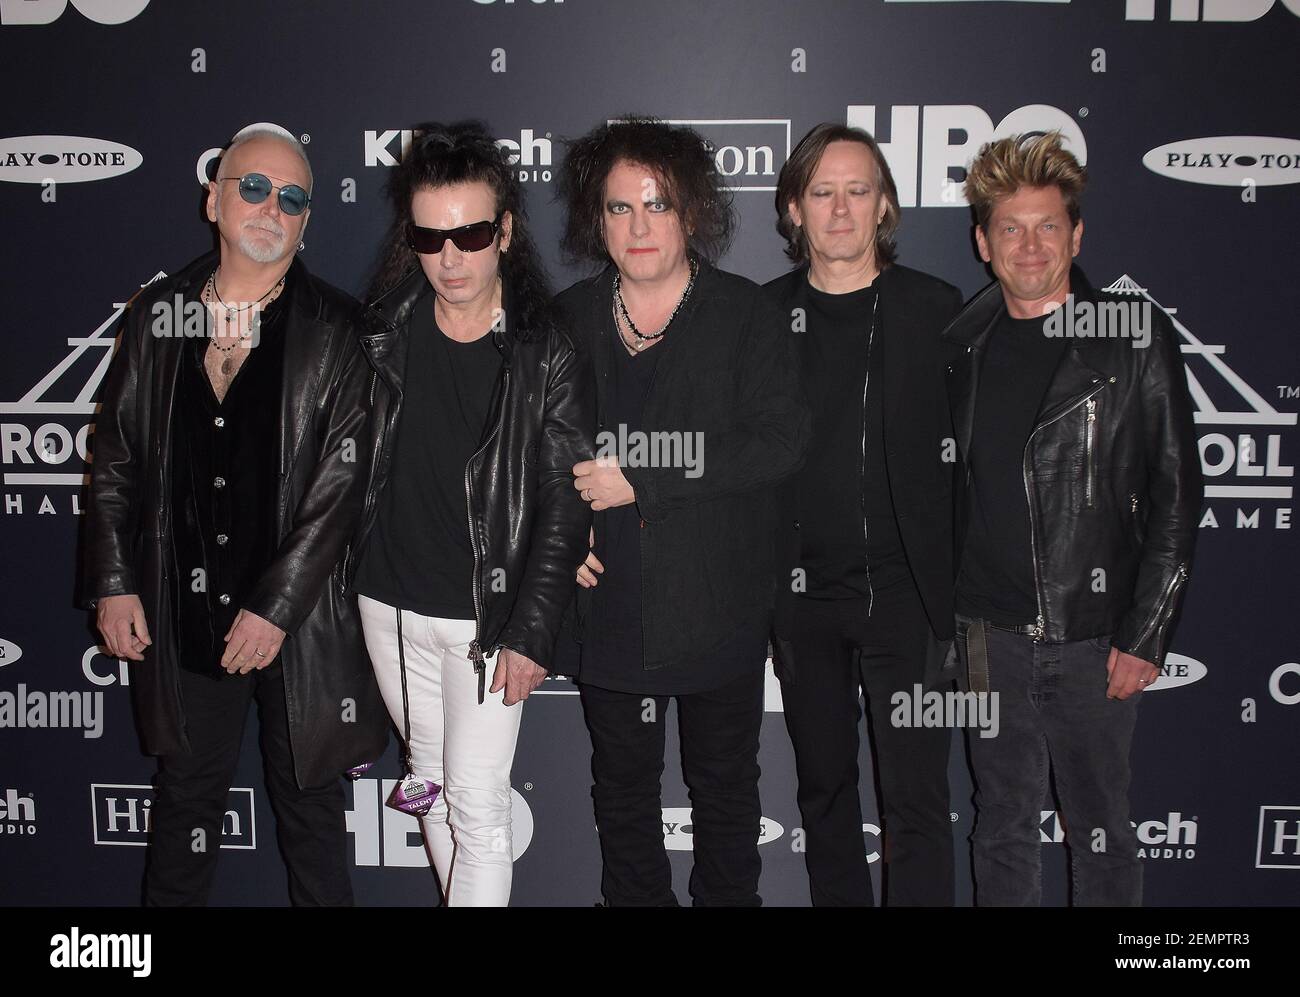 Reeves Gabrels, Simon Gallup, Robert Smith, Roger O'Donnell and Jason  Cooper of The Cure attends the 2019 Rock & Roll Hall Of Fame Induction  Ceremony at Barclays Center on March 29, 2019